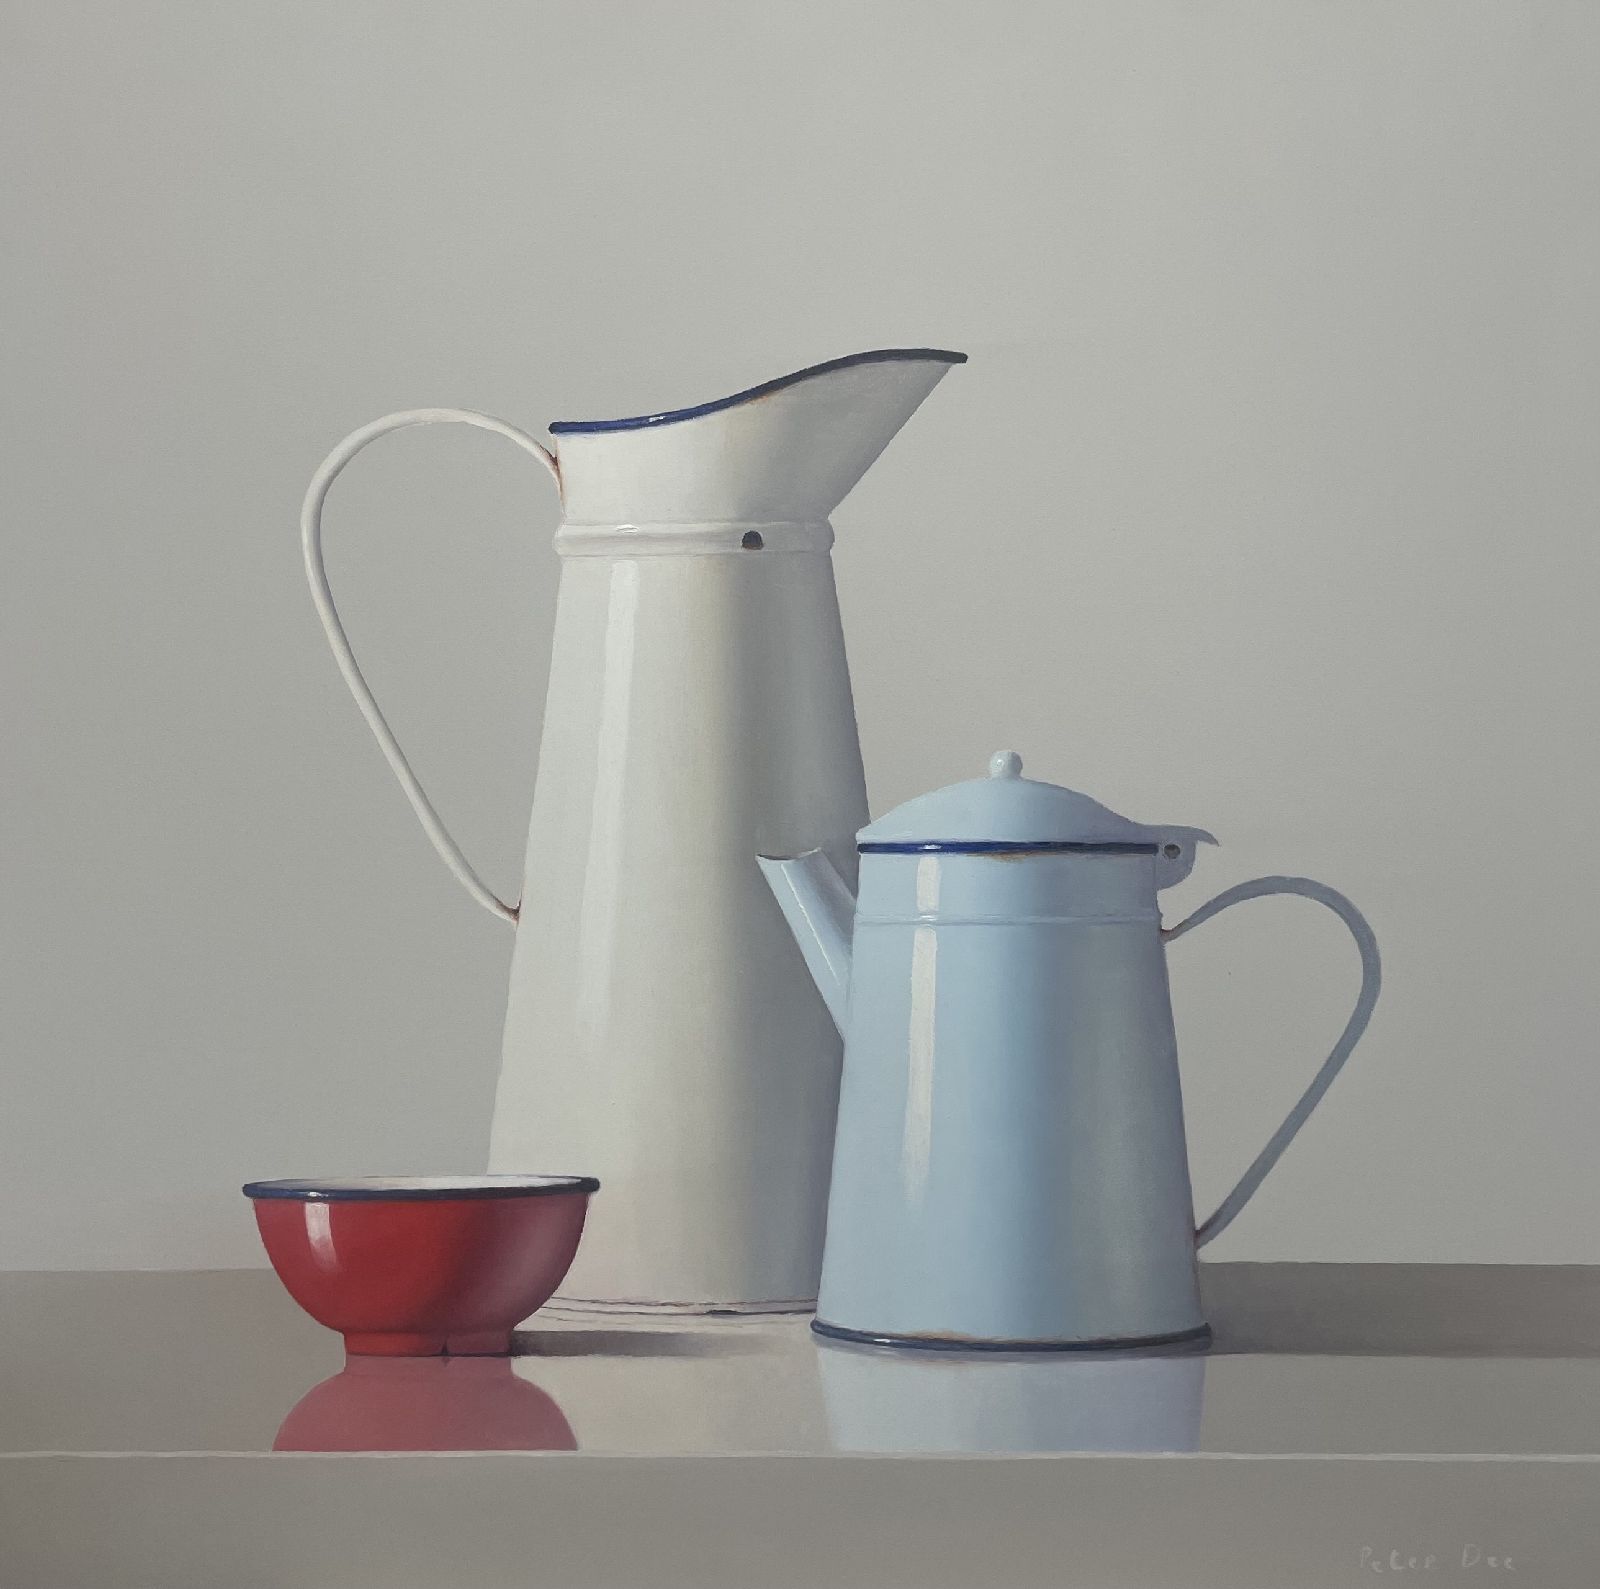 Peter Dee - Red, White and Blue Vintage Enamelware